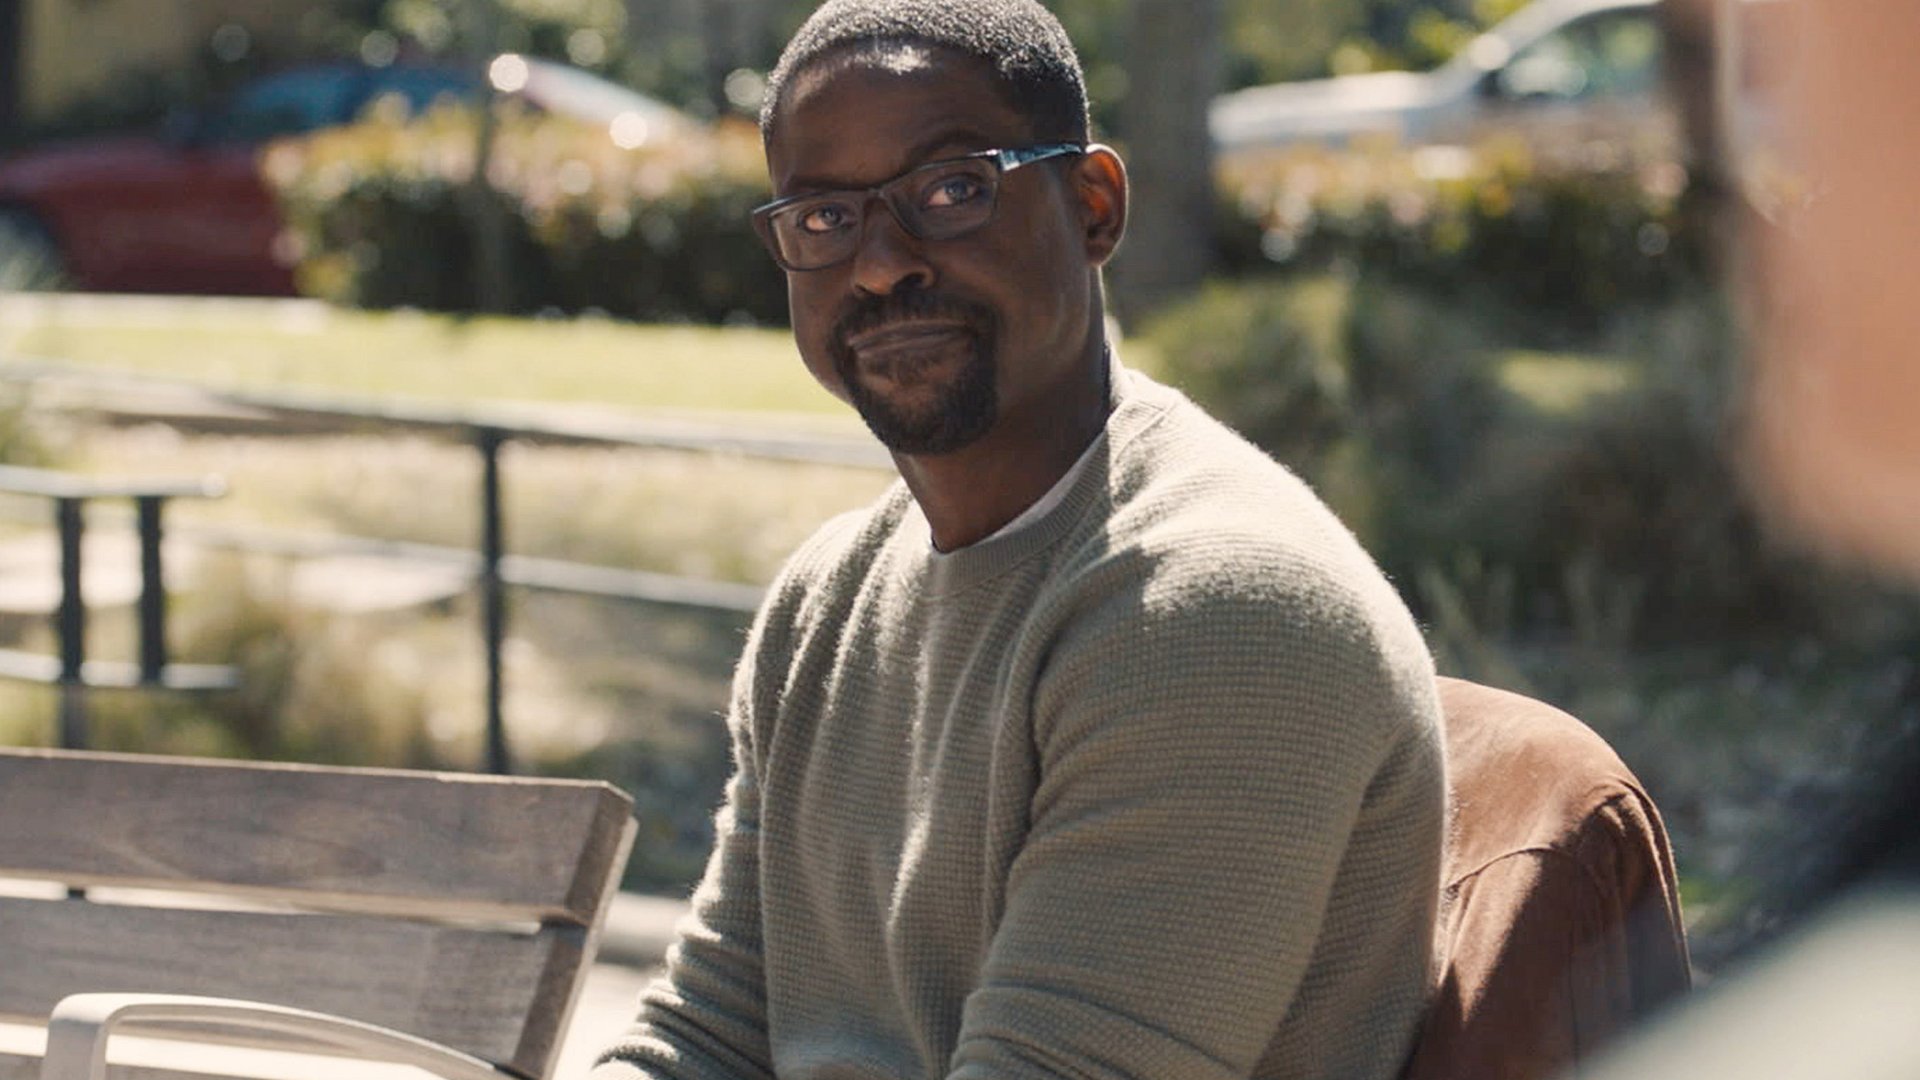 Sterling K. Brown as Randall Pearson at the transracial adoption support group in ‘This Is Us’ Season 5 Episode 12